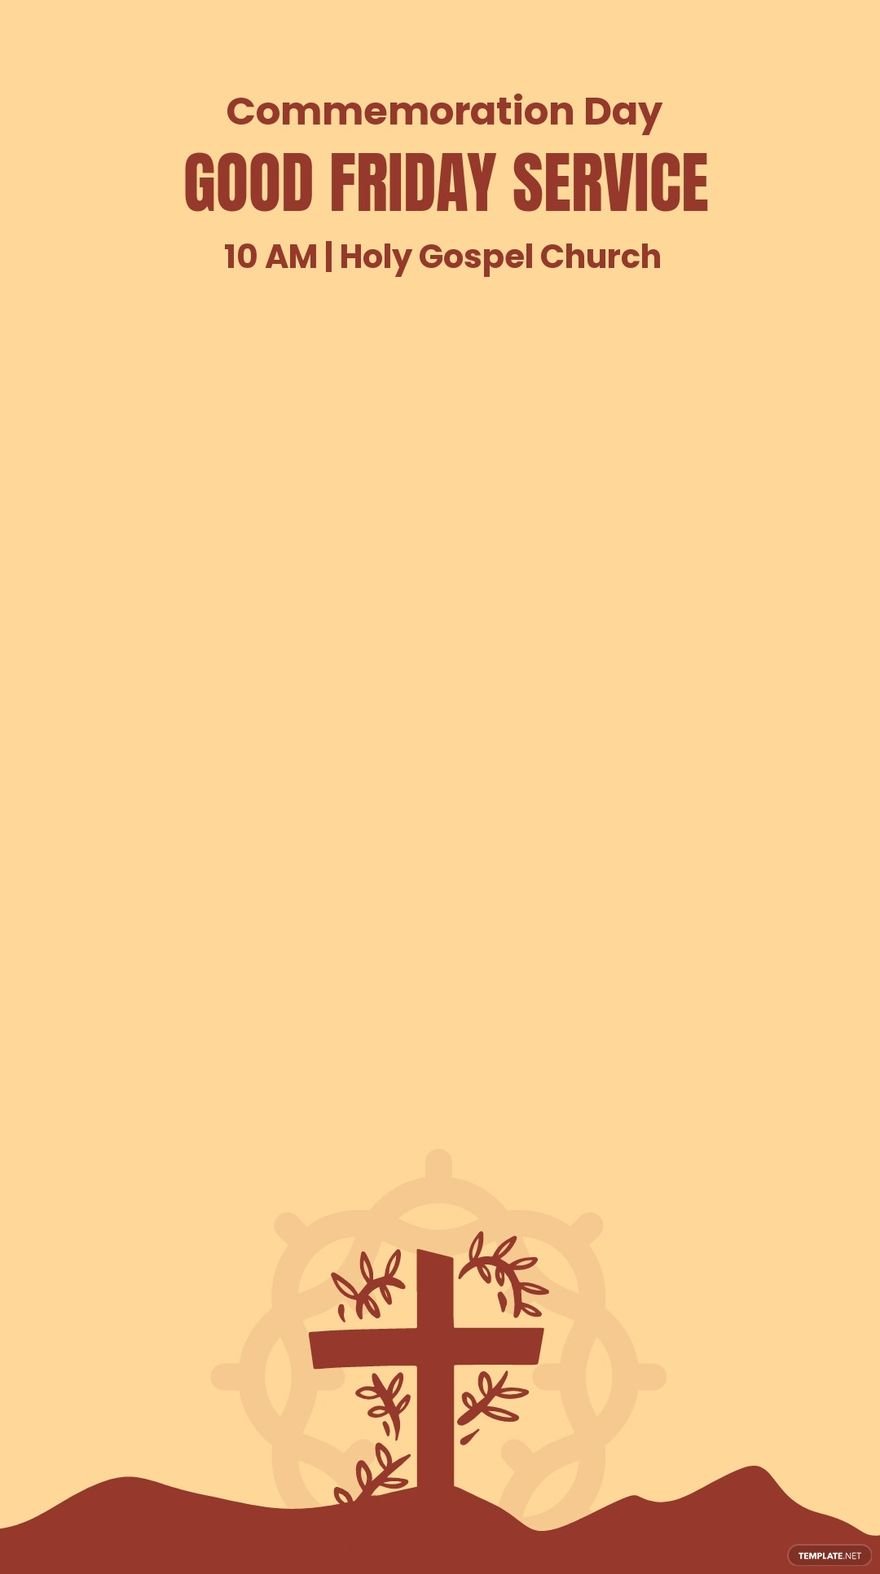 Good Friday Service Snapchat Geofilter Template